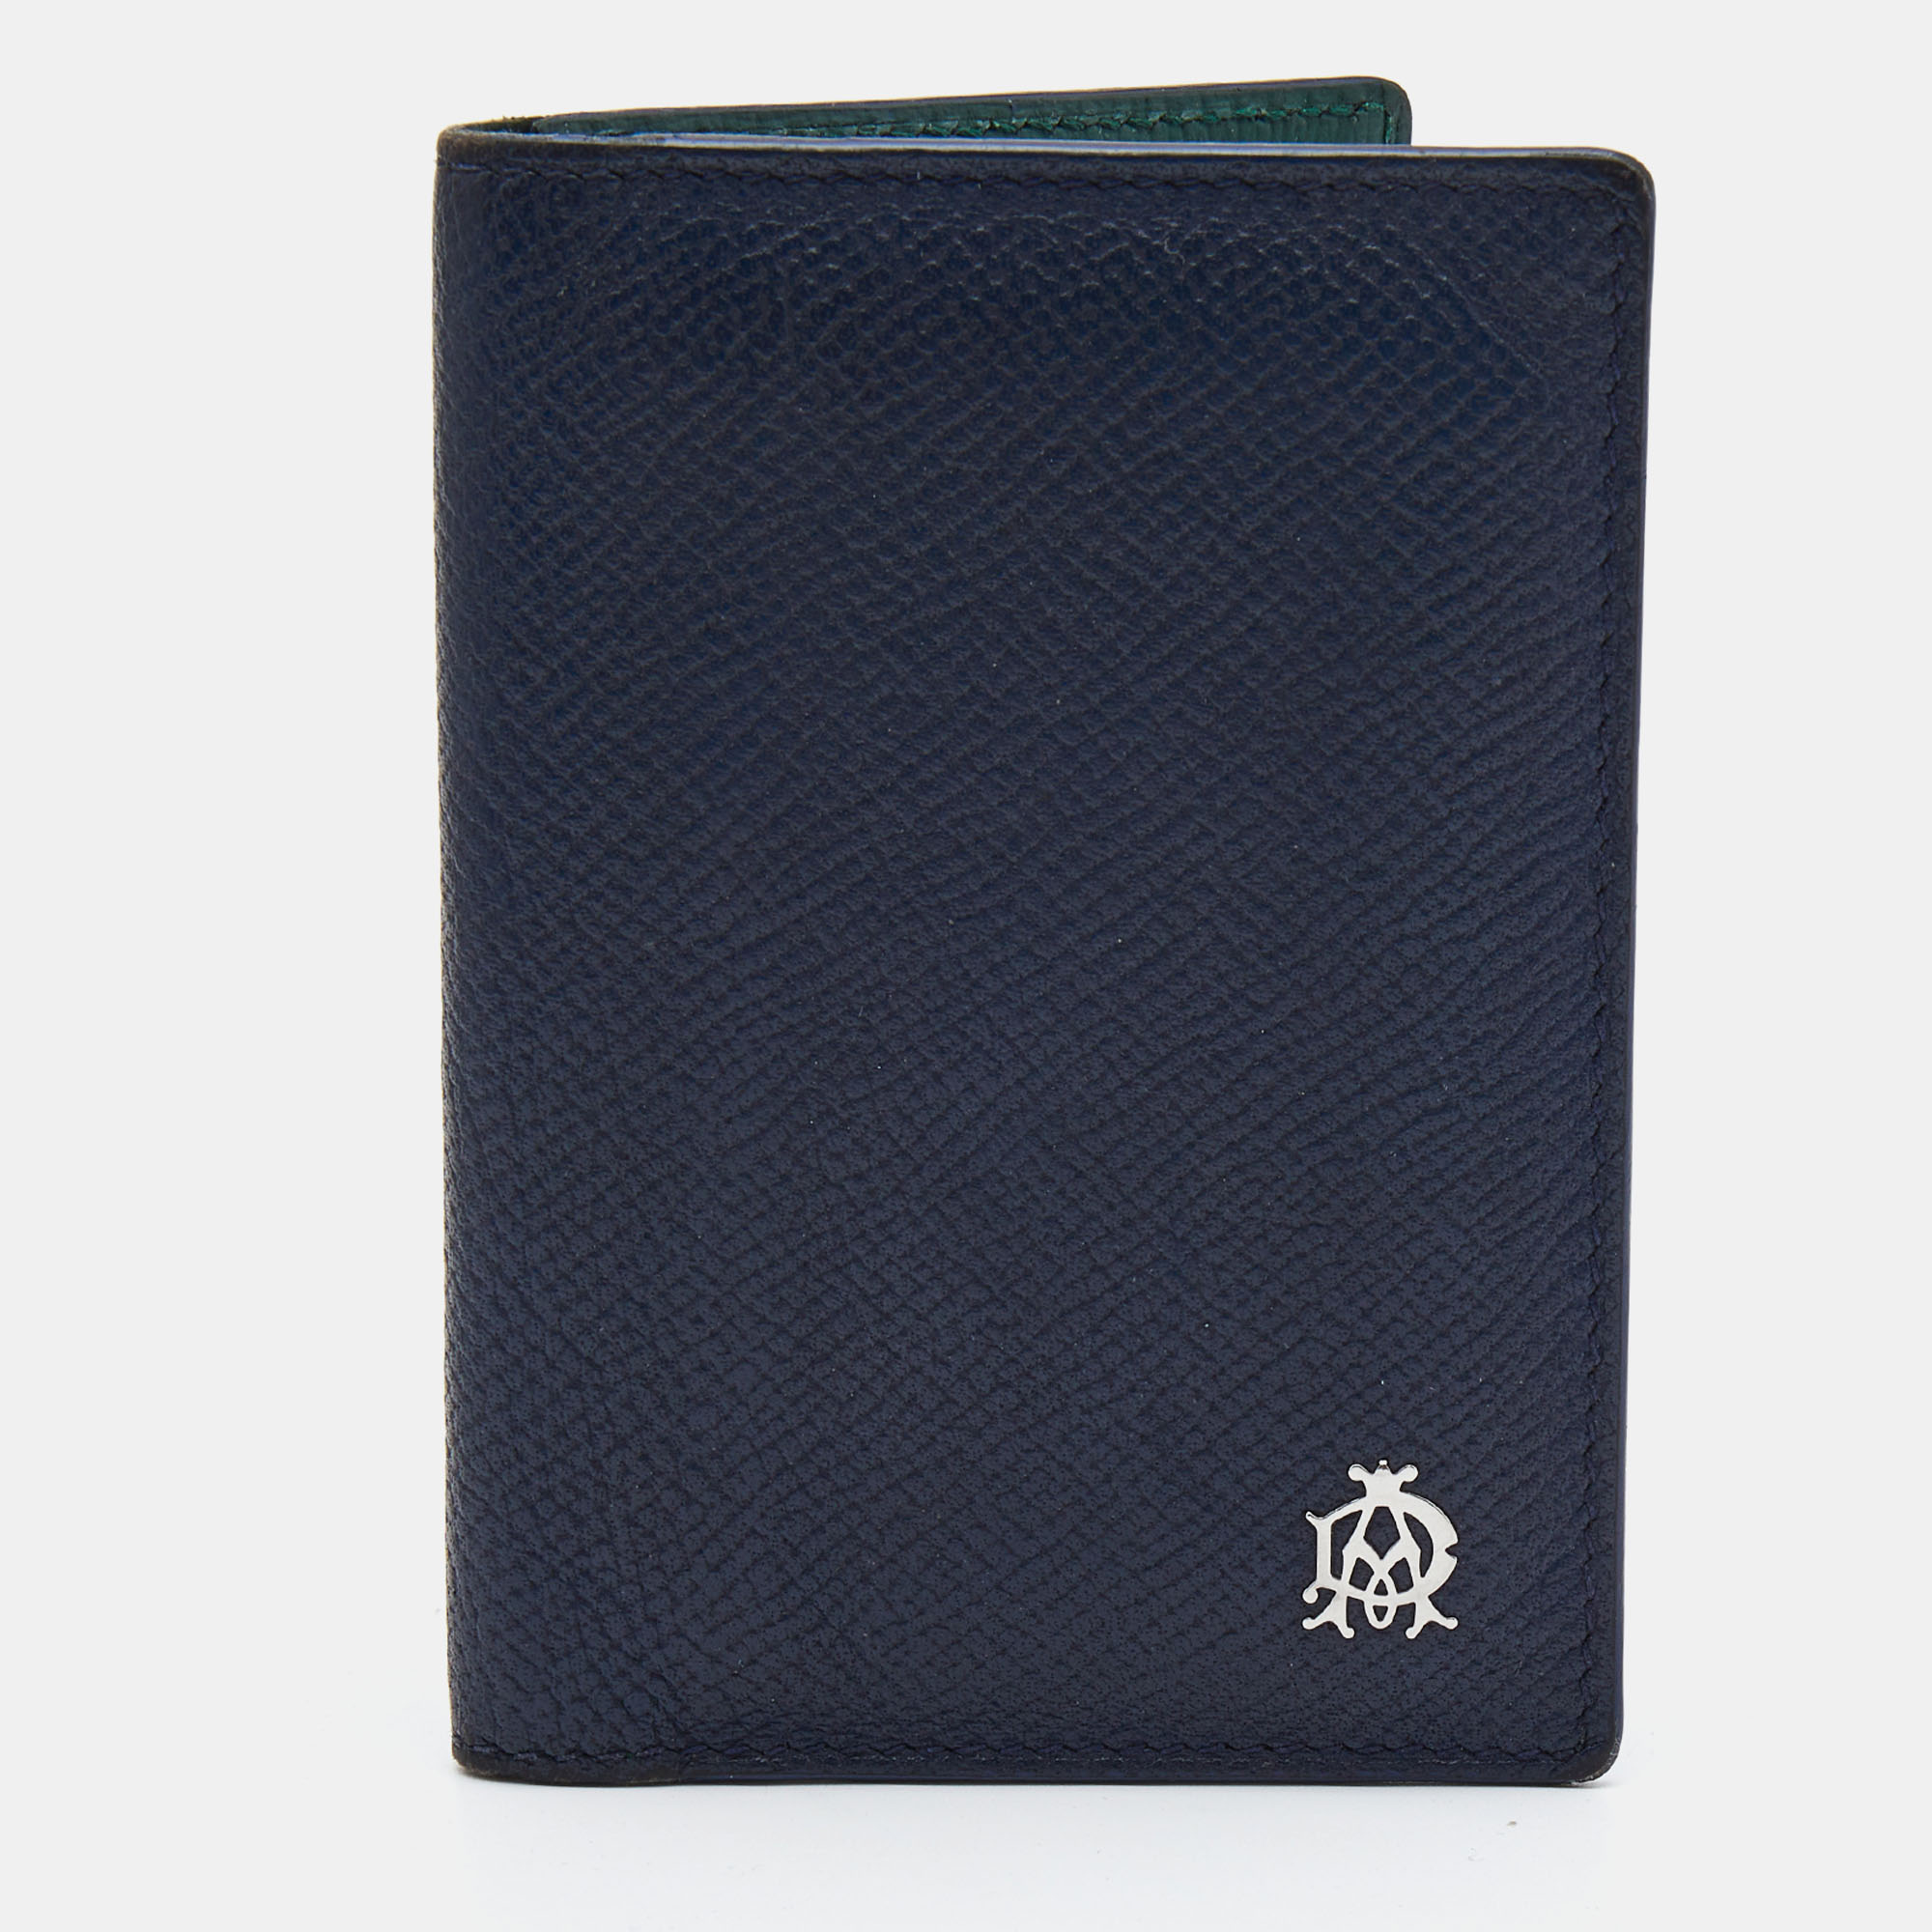 Pre-owned Alfred Dunhill Navy Blue Leather Logo Bifold Card Case